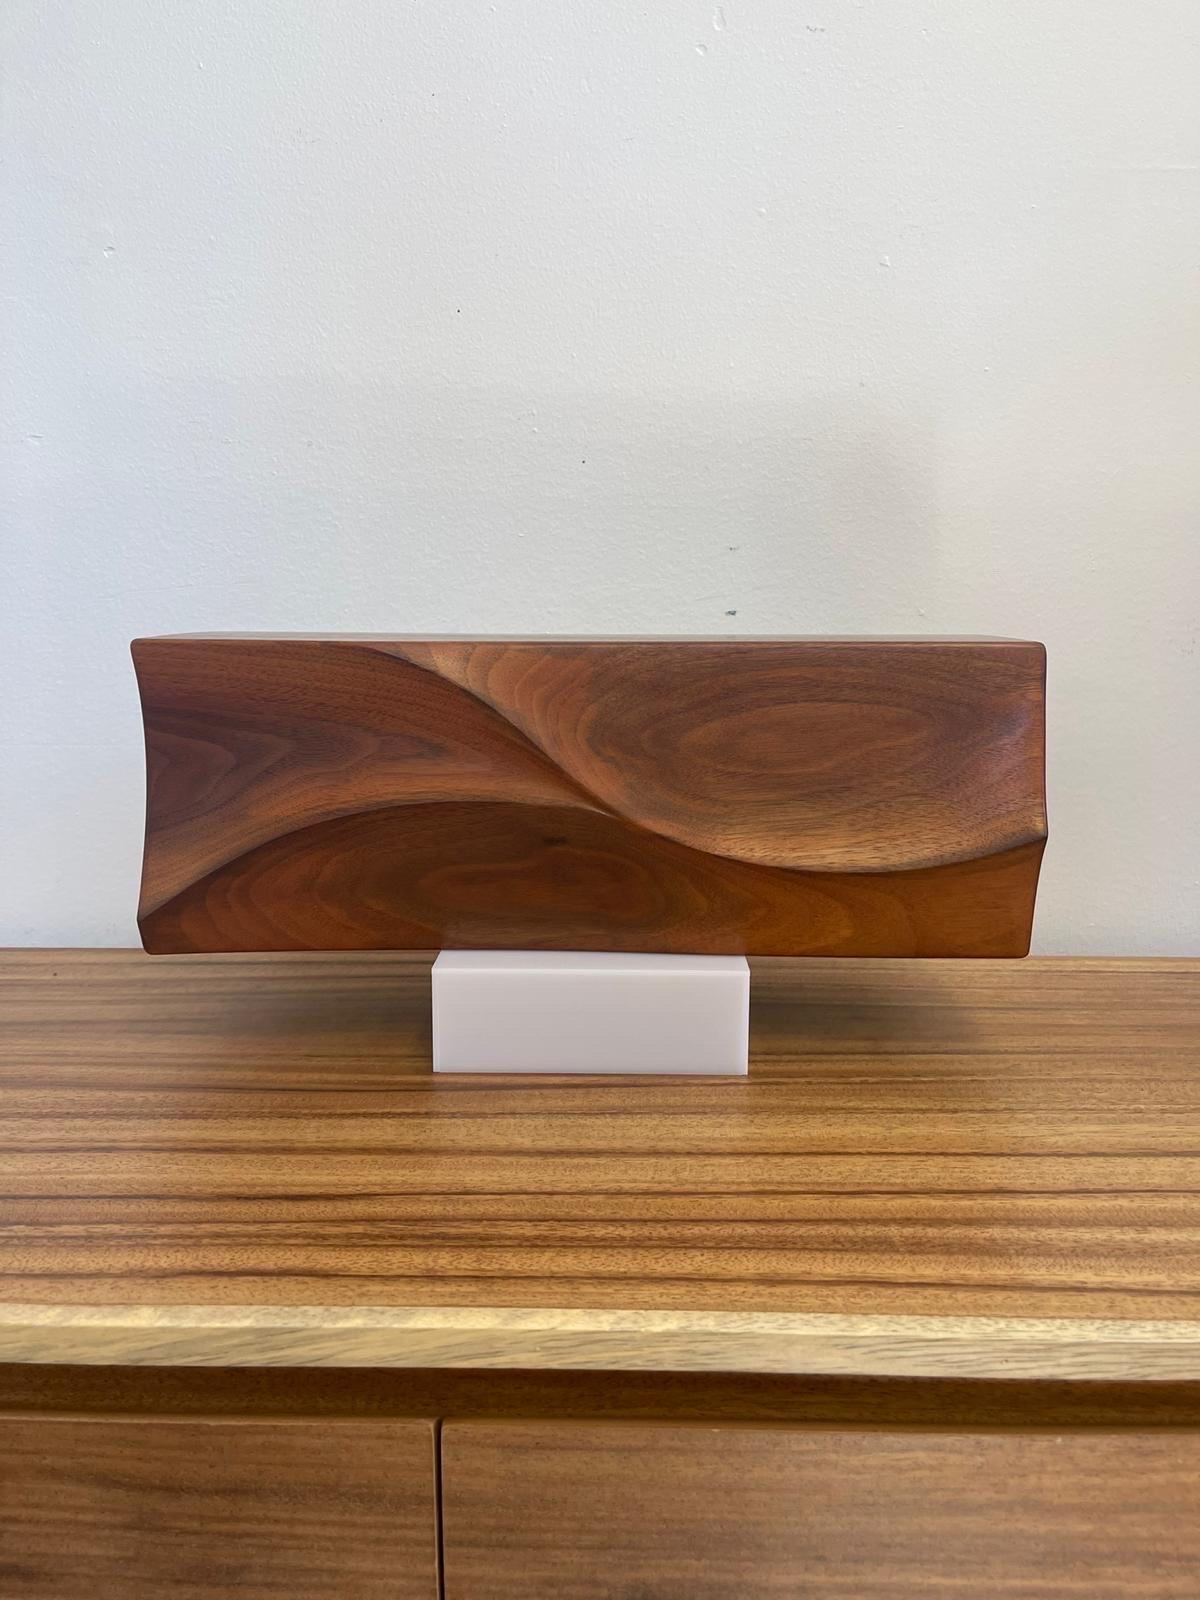 Carved wood decorative piece can be used as a floating shelf unit or organic decor. Beautiful Wood Grain with sleek design. Signed by the marker as shown. Vintage Condition Consistent with Age as Pictured.

Dimensions. 17 W ; 6 D ; 5 H